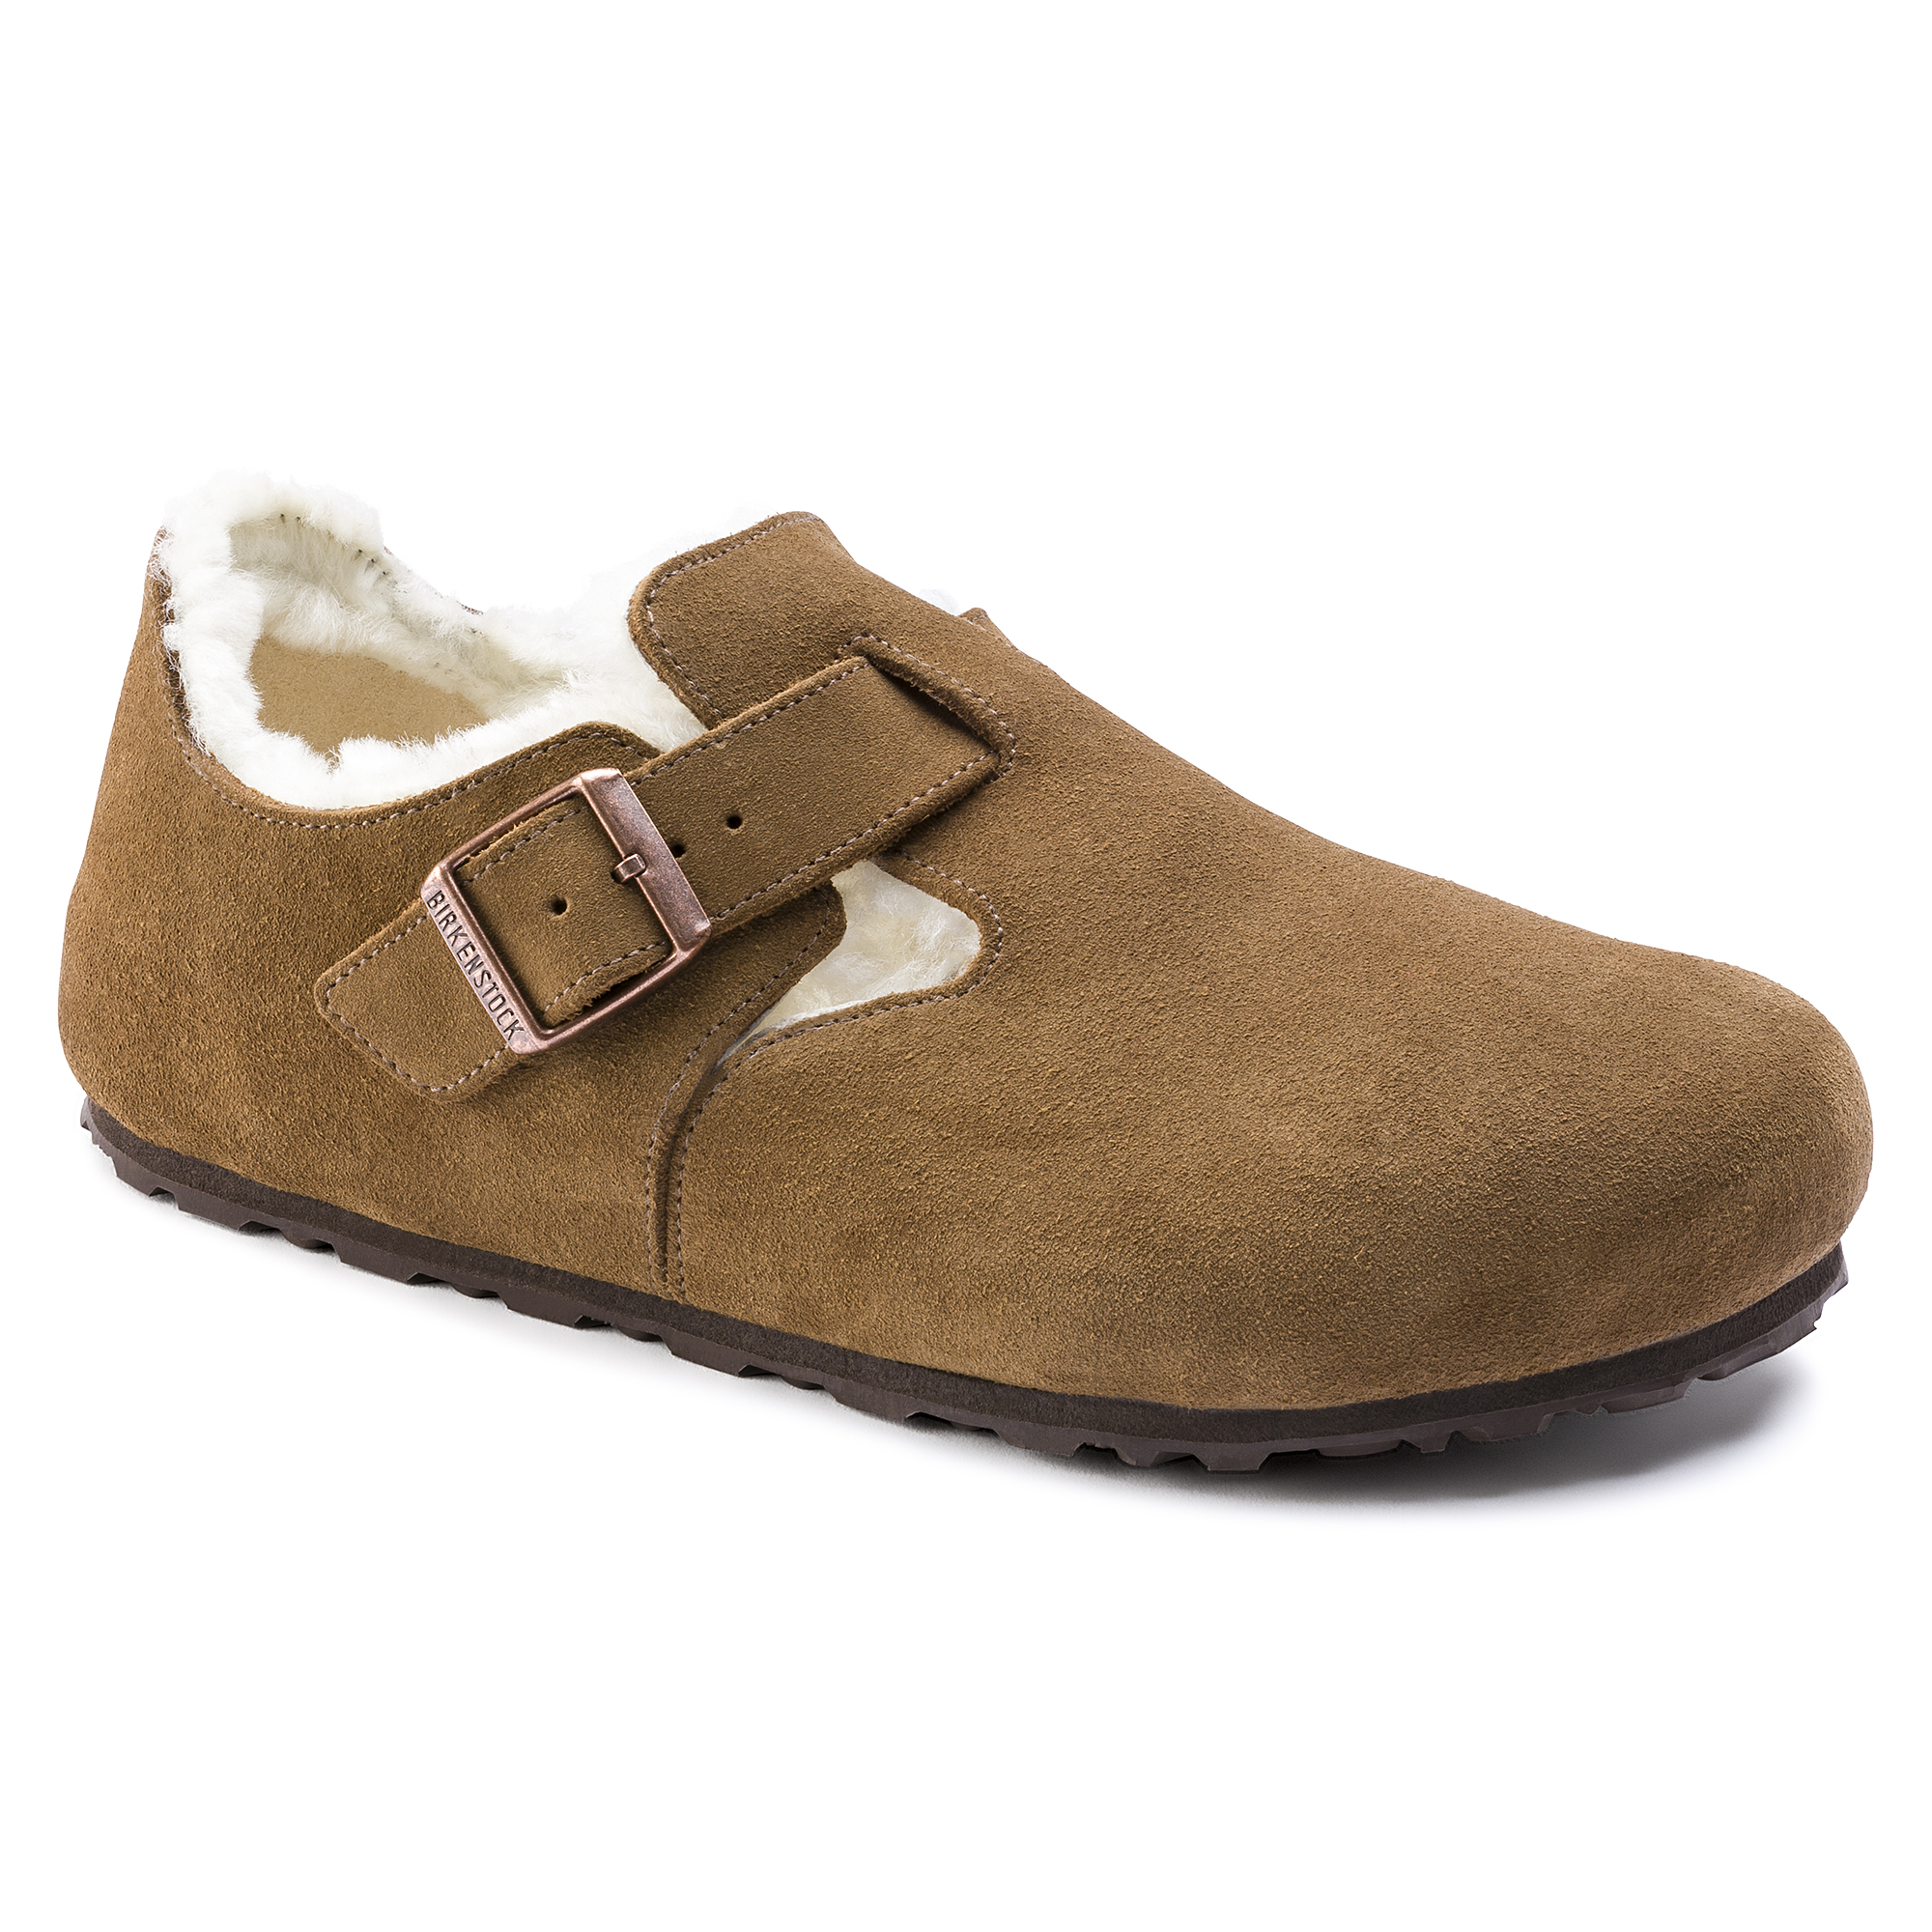 London Suede Leather Shearling Tea 